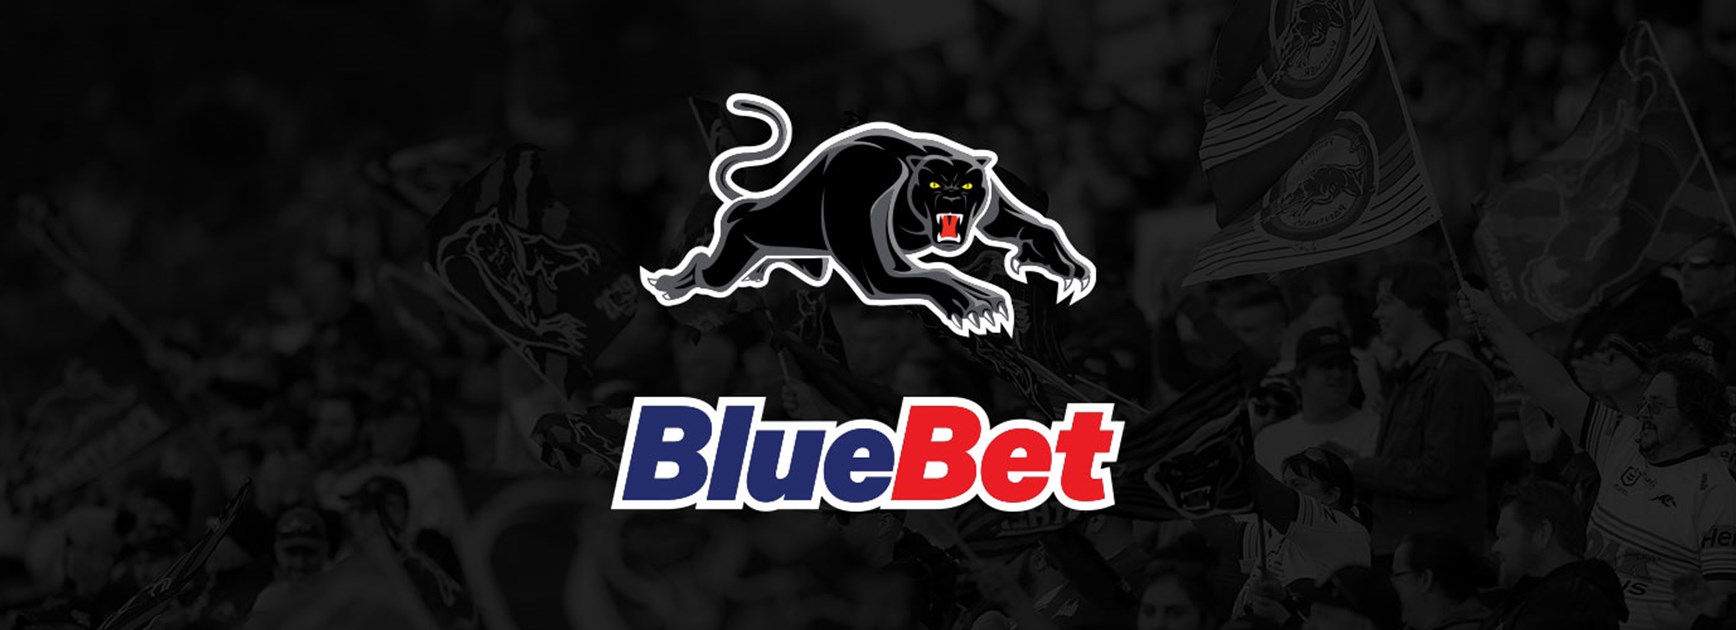 Panthers home becomes BlueBet Stadium